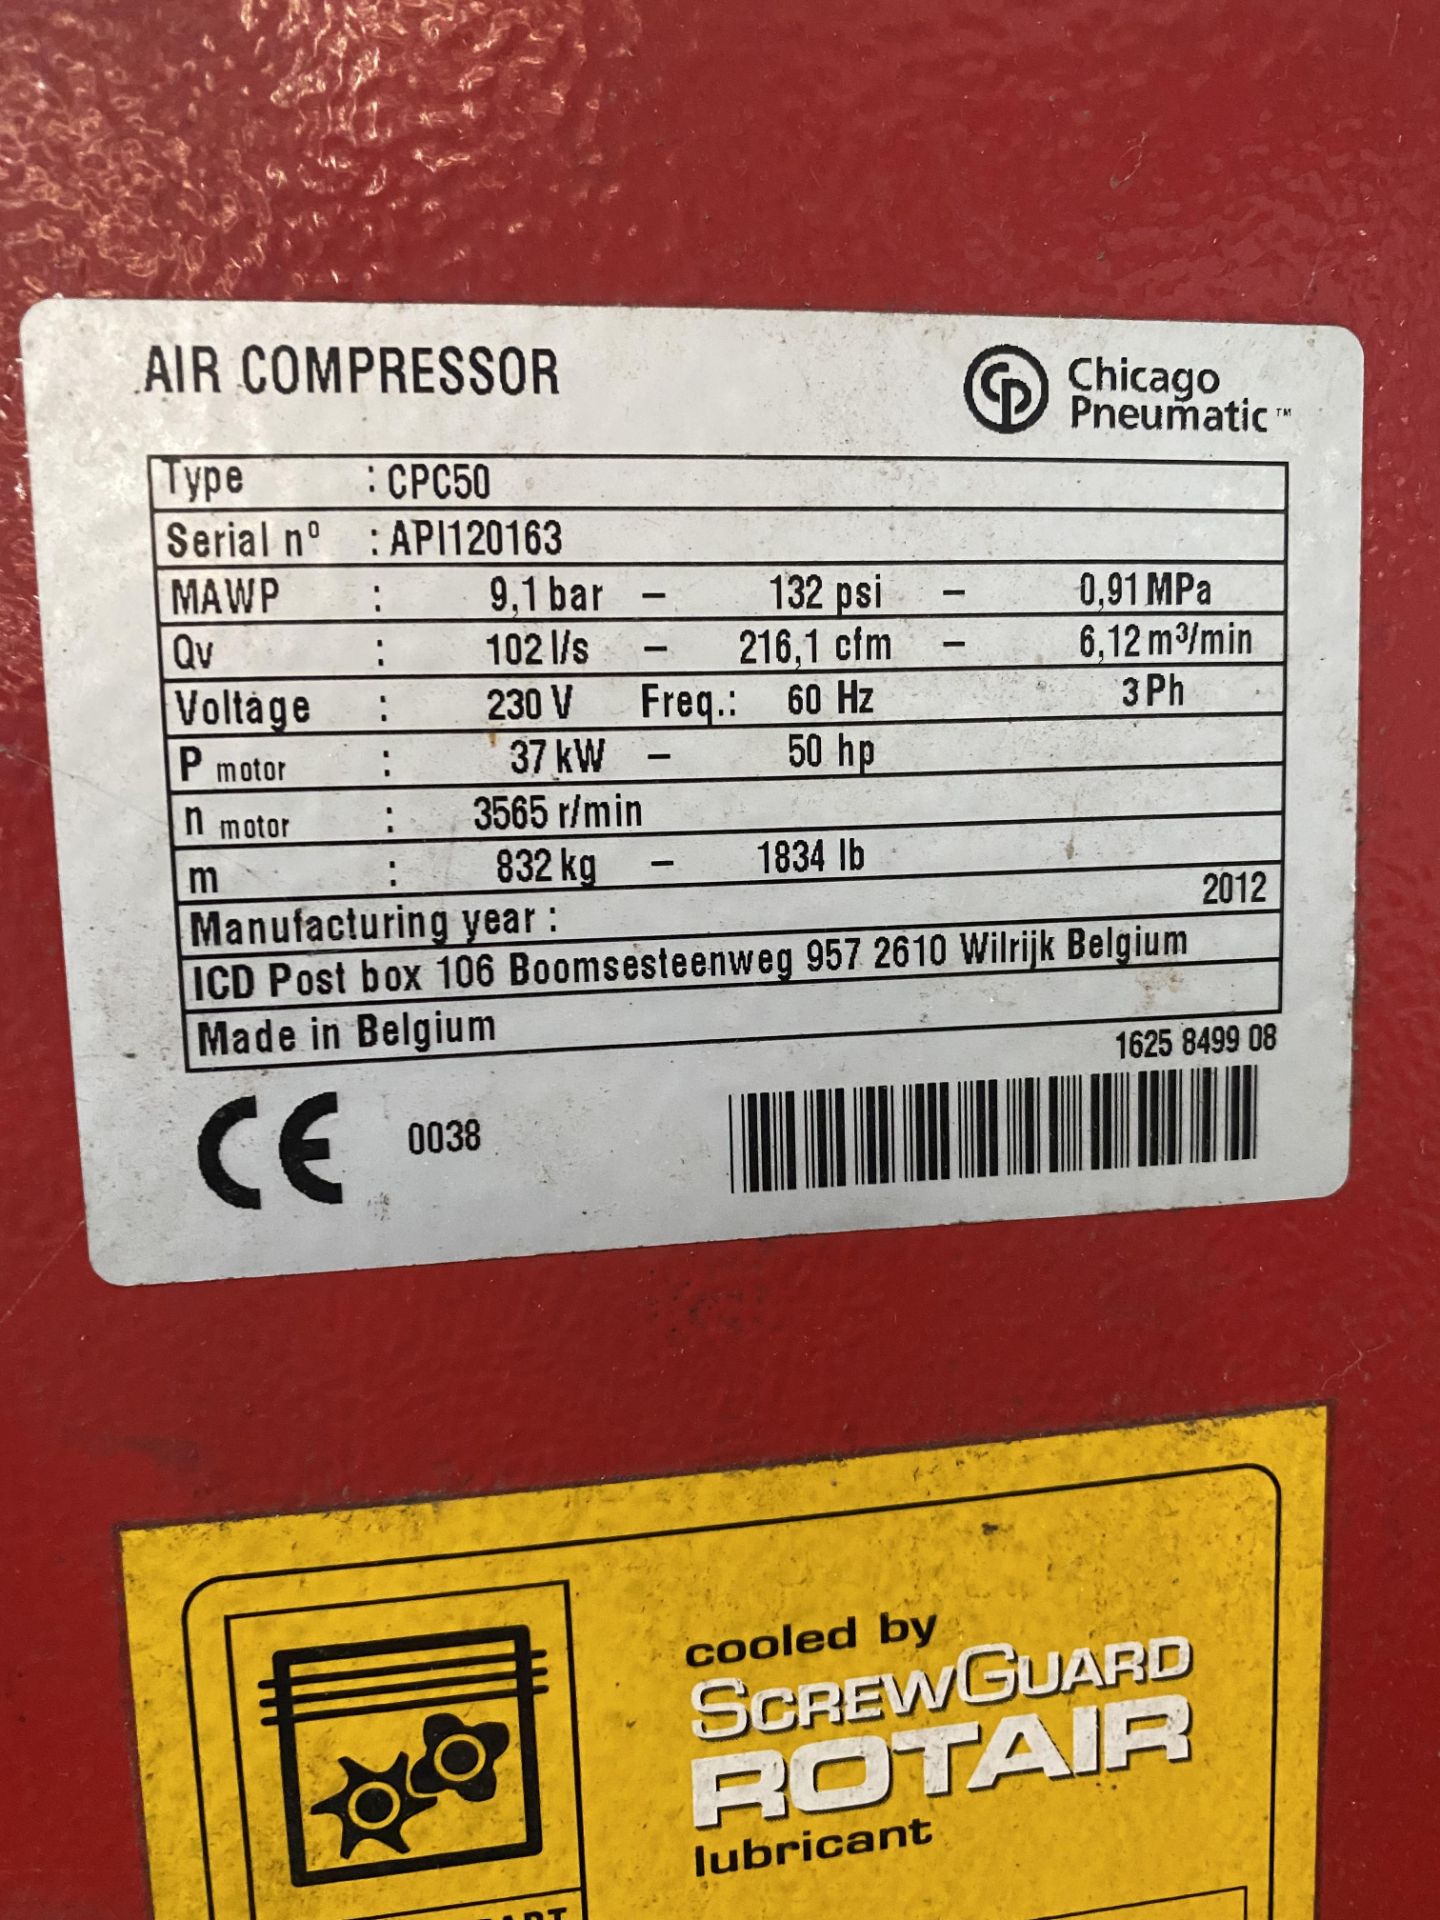 2012 Chicago Pneumatic CPC50 Rotary Screw Air Compressor s/n API120163, 50 HP, 132 PSI, 3PH - Image 4 of 4